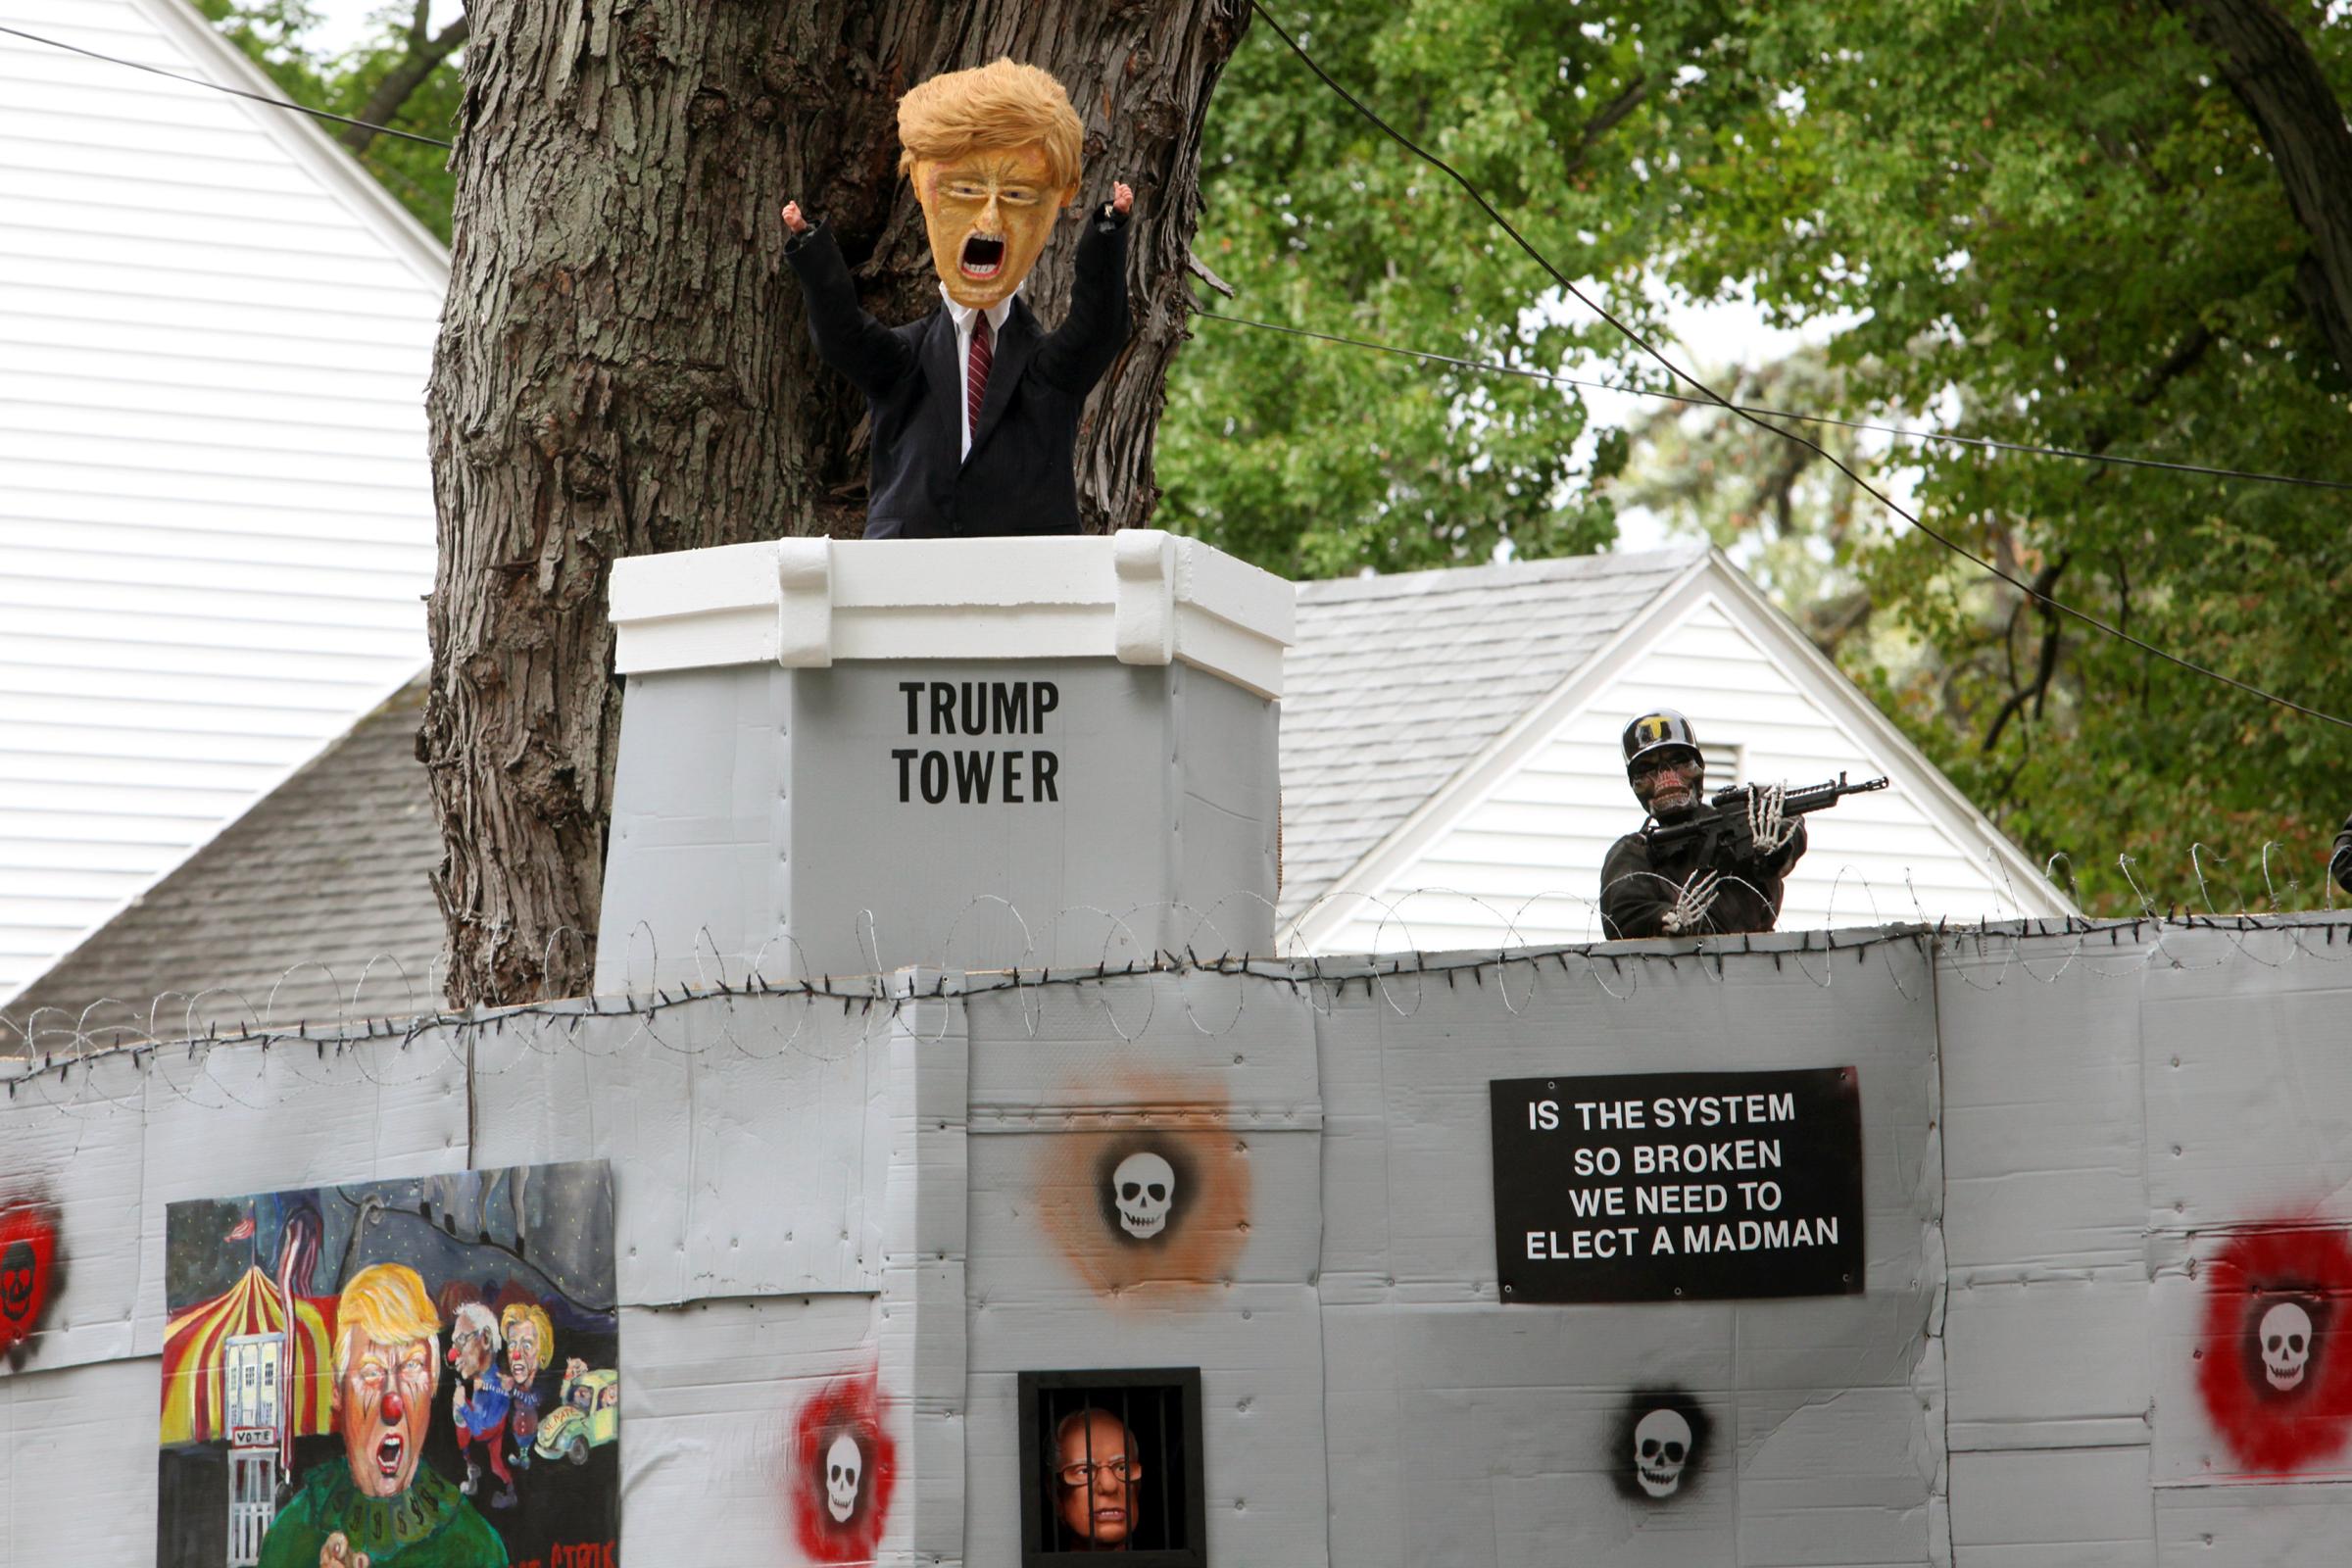 A Halloween display featuring a border wall and figures of Donald Trump, Hillary Clinton and Bernie Sanders is seen on the property of Matt Warshauer in West Hartford